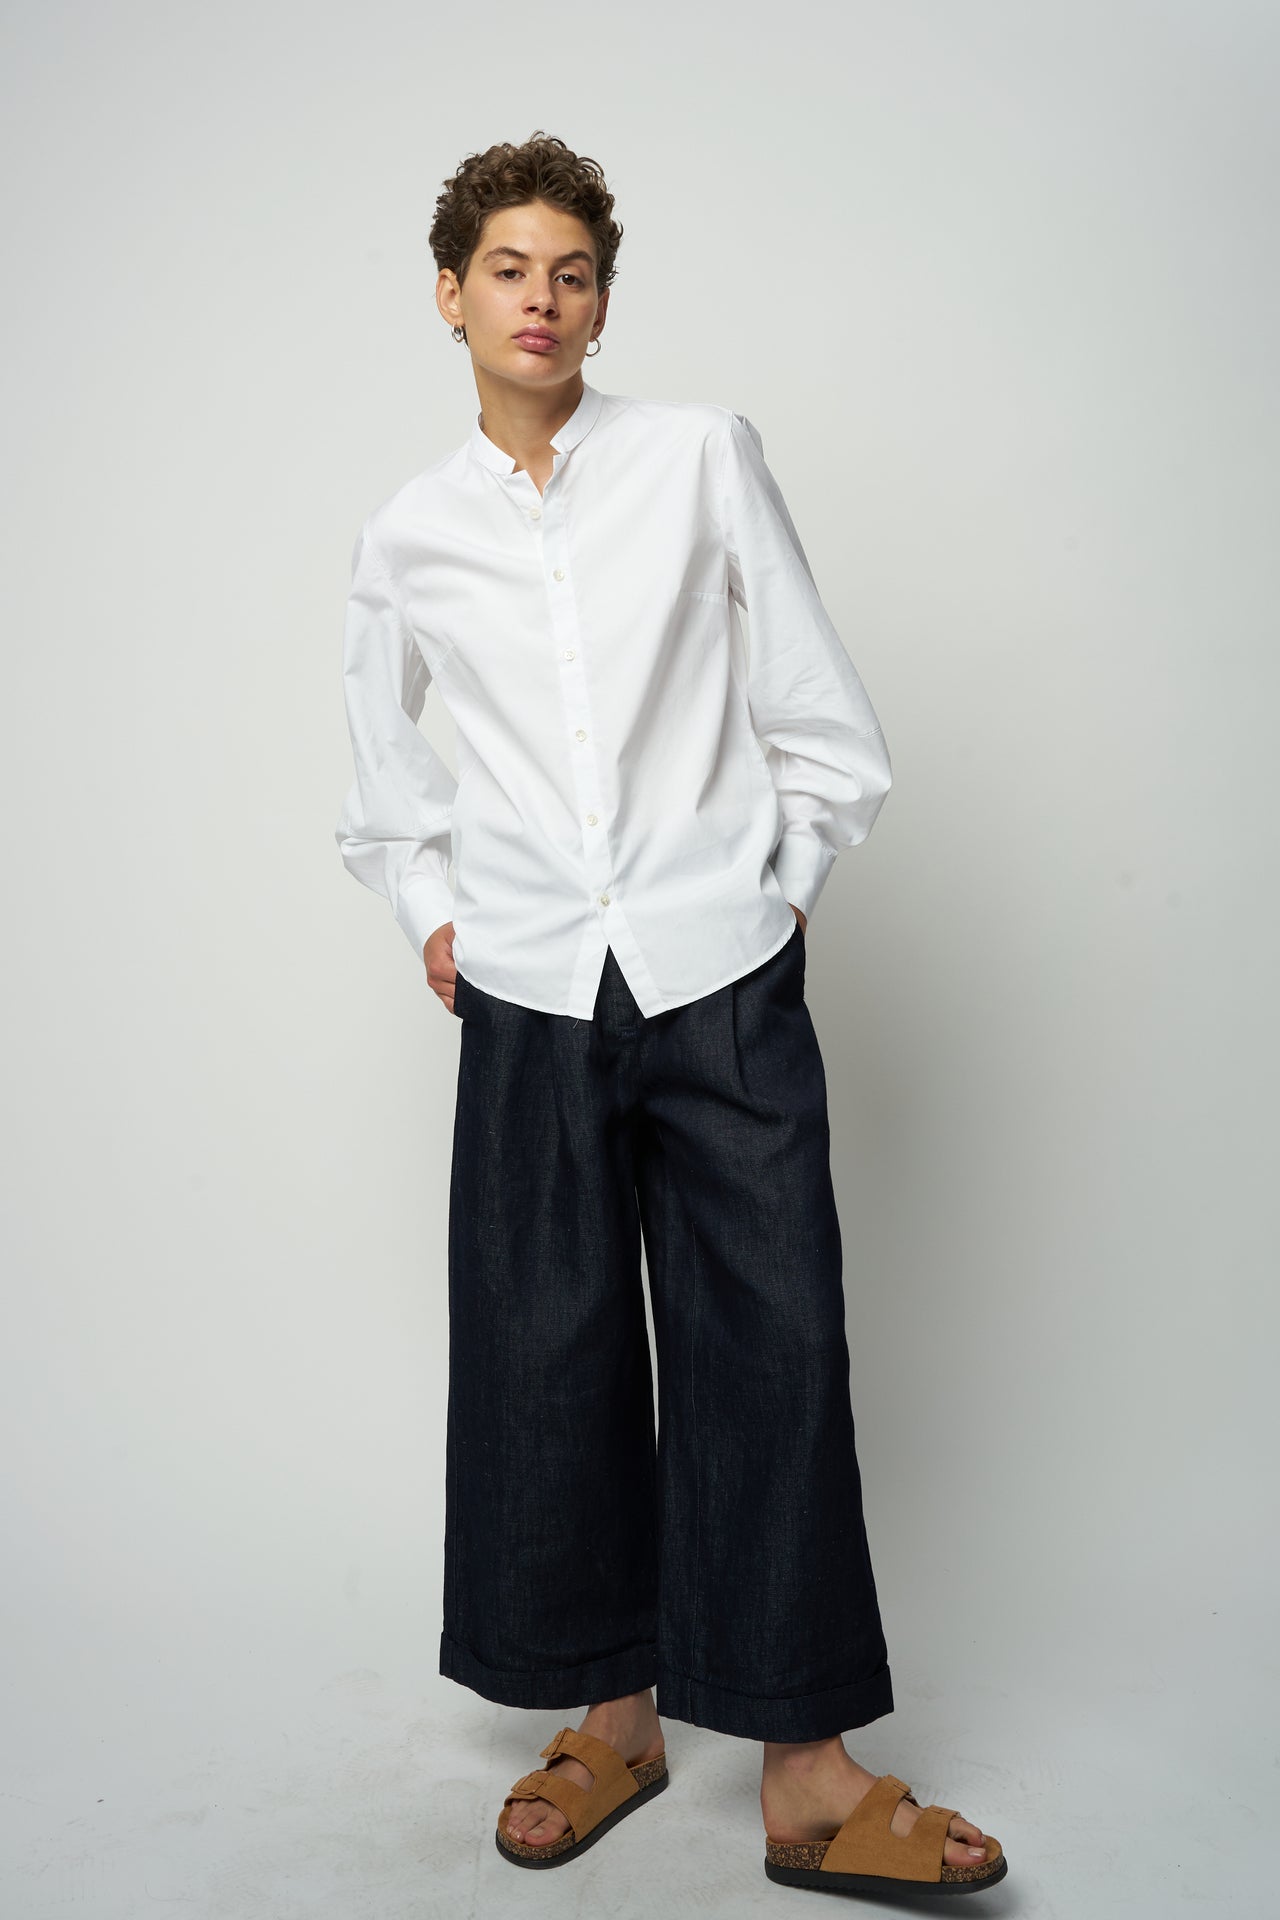 Relaxed Bulky Sleeves Shirt in a White Portuguese Organic Cotton Poplin